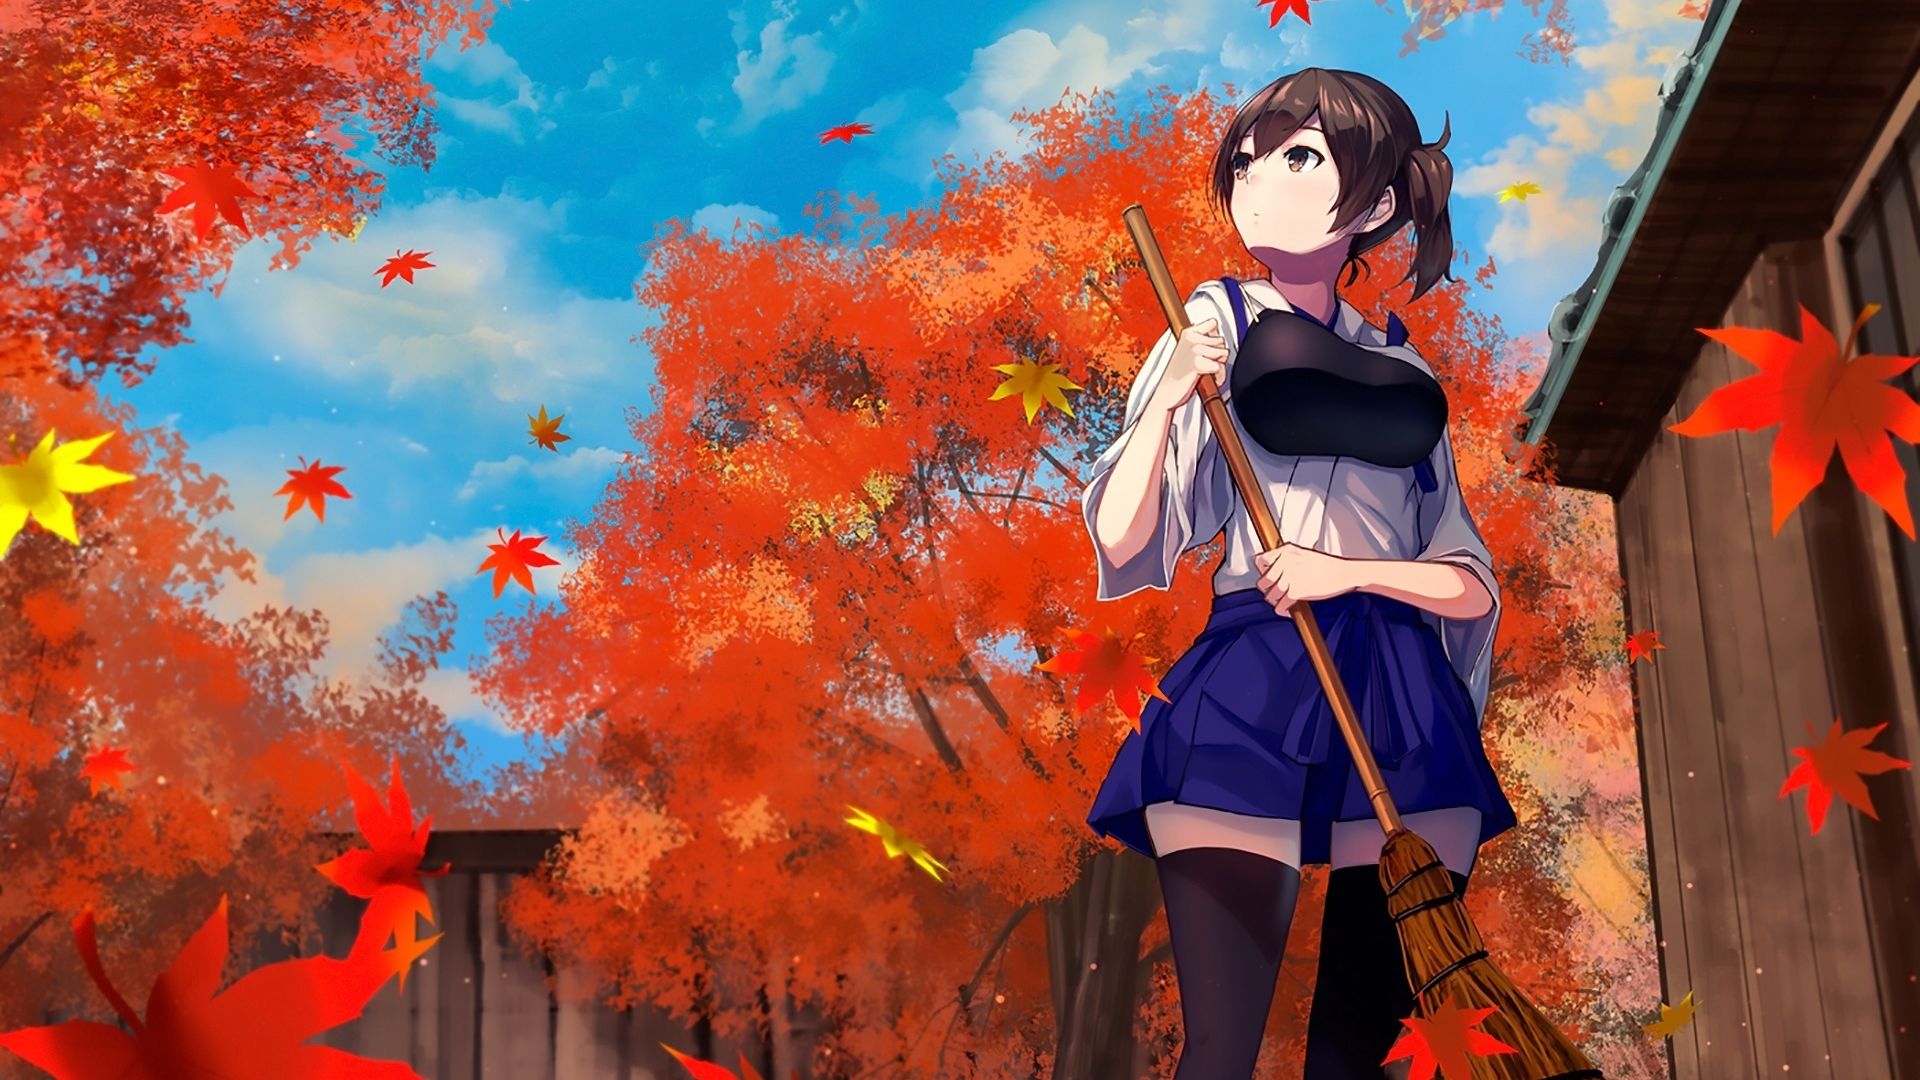 Desktop Wallpaper Kaga Kancolle Autumn Outdoor Cleaning Hd Image Picture Background 34faa0